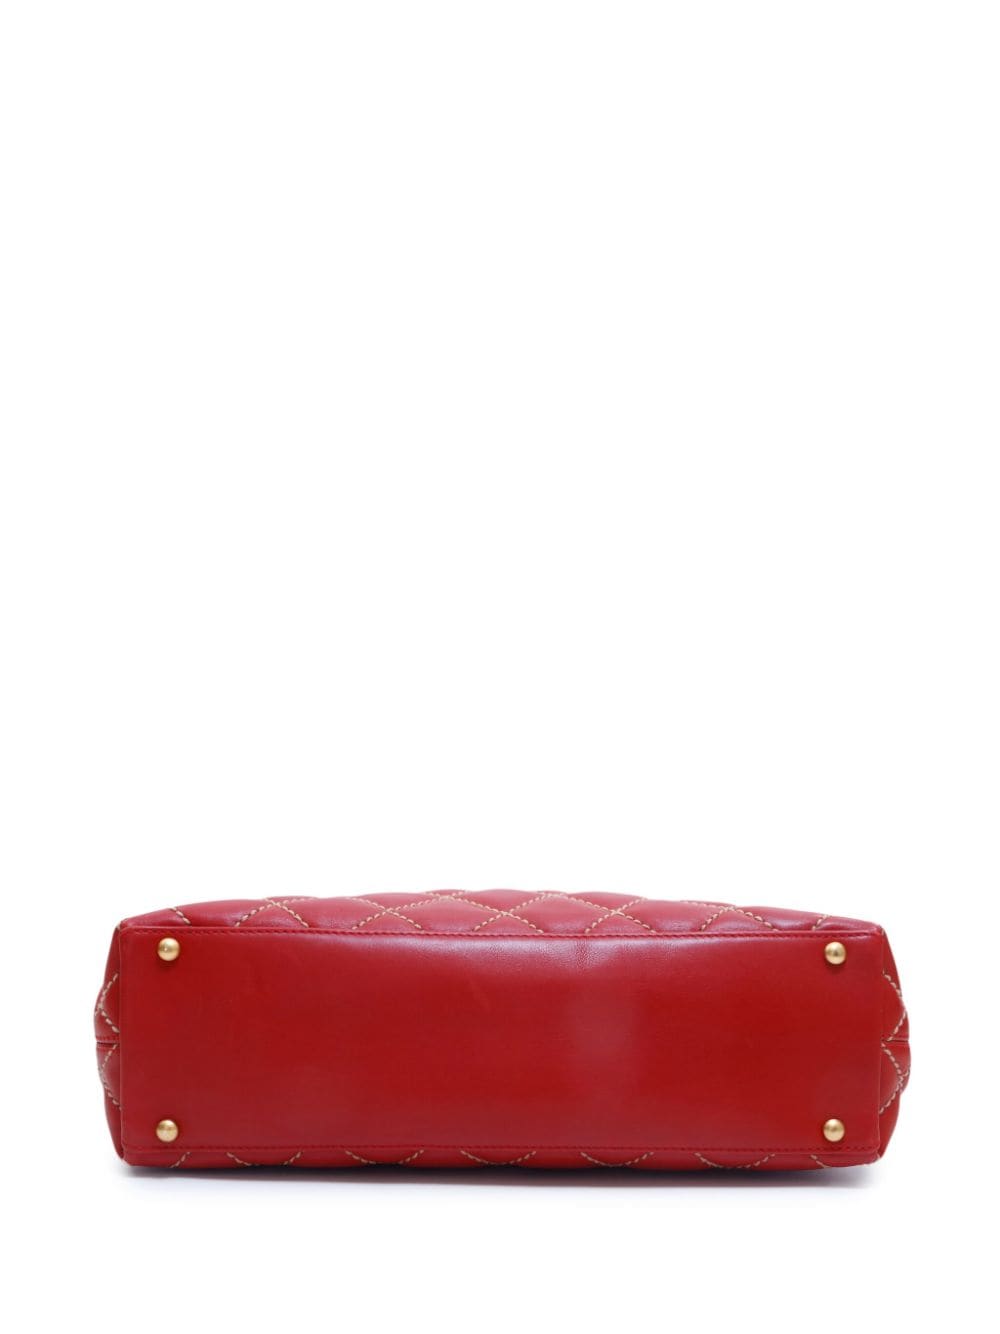 Pre-owned Chanel Wild Stitch 手提包（2002年典藏款） In Red